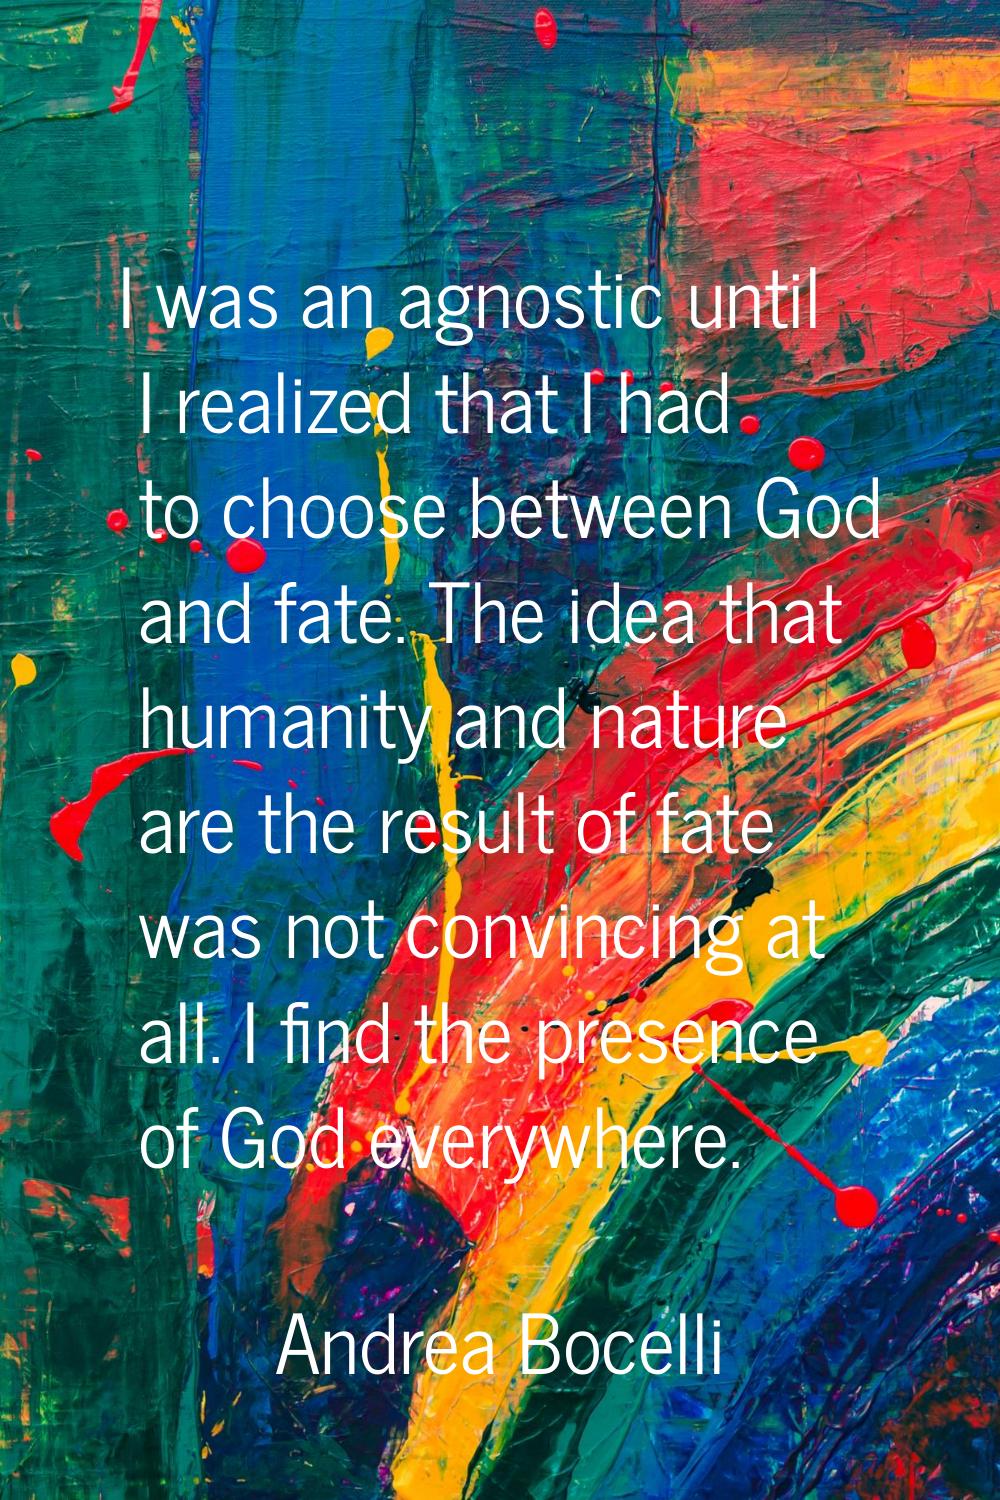 I was an agnostic until I realized that I had to choose between God and fate. The idea that humanit